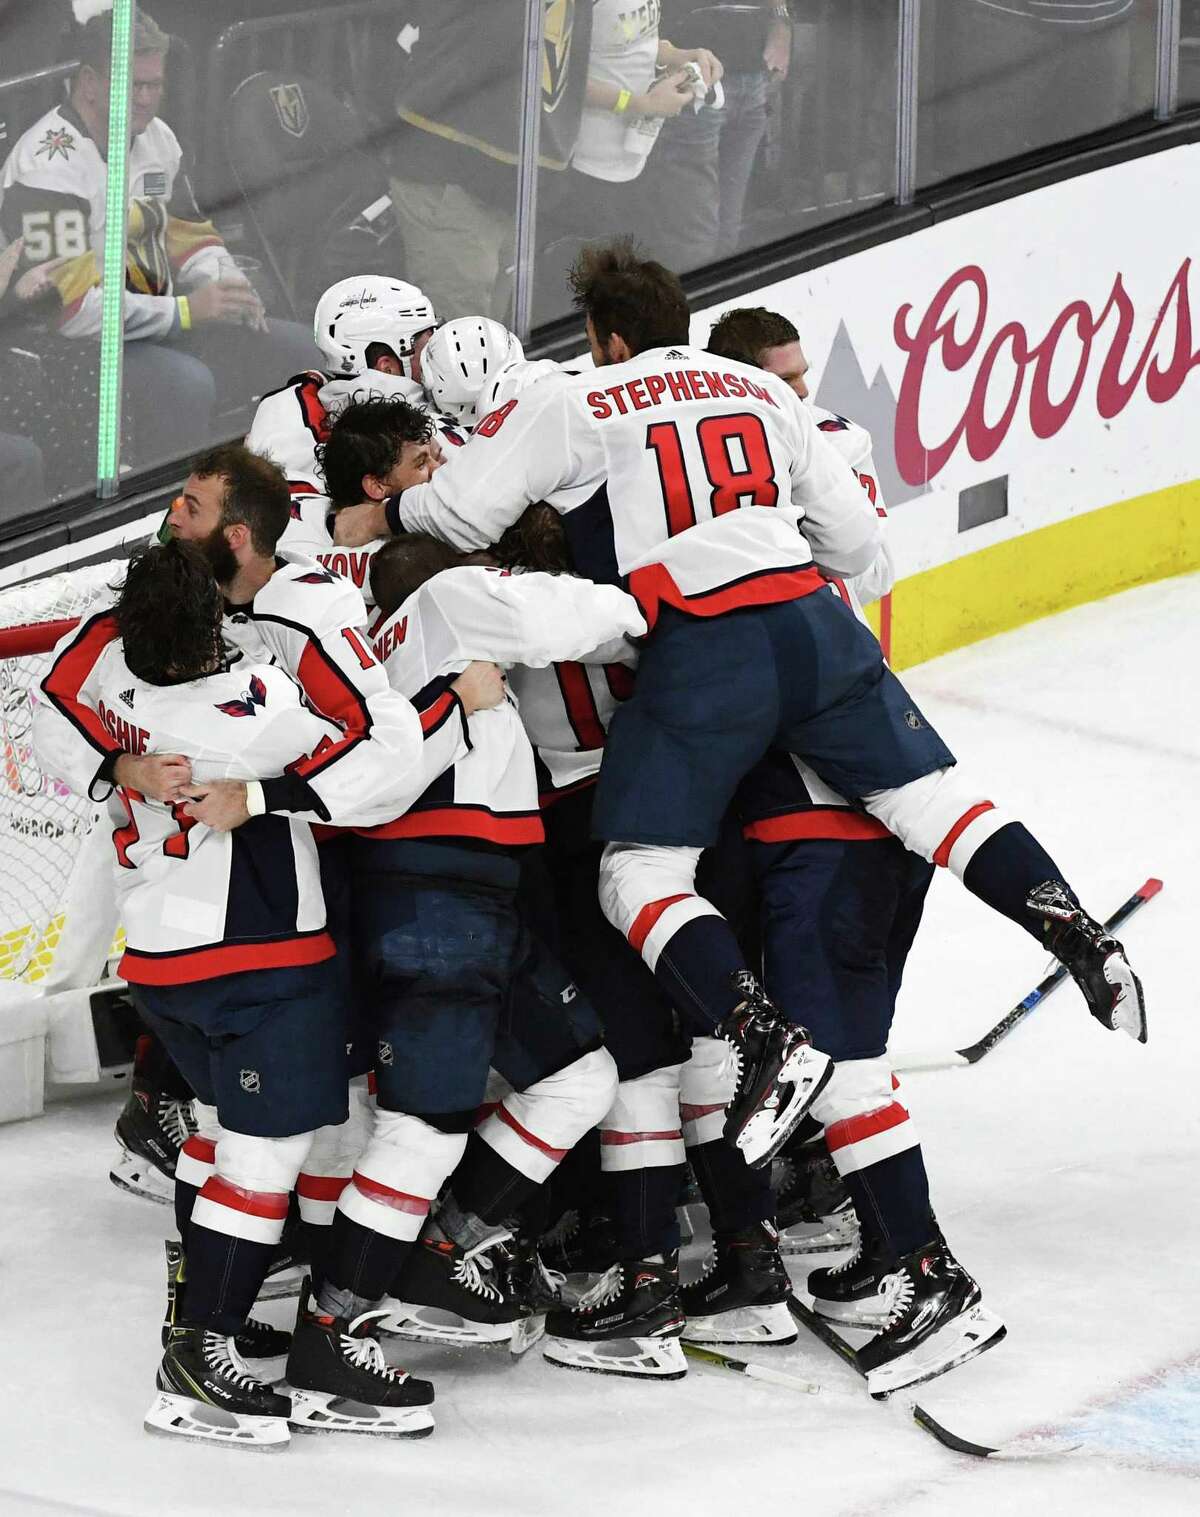 LAS VEGAS, NV - JUNE 07: Chandler Stephenson, No. 18, of the Washington Capitals leaps into his teammates’ arms, as they celebrate their 4-3 win over the Vegas Golden Knights in Game 5 of the 2018 NHL Stanley Cup Final, at T-Mobile Arena, on June 7, 2018, in Las Vegas, Nevada.